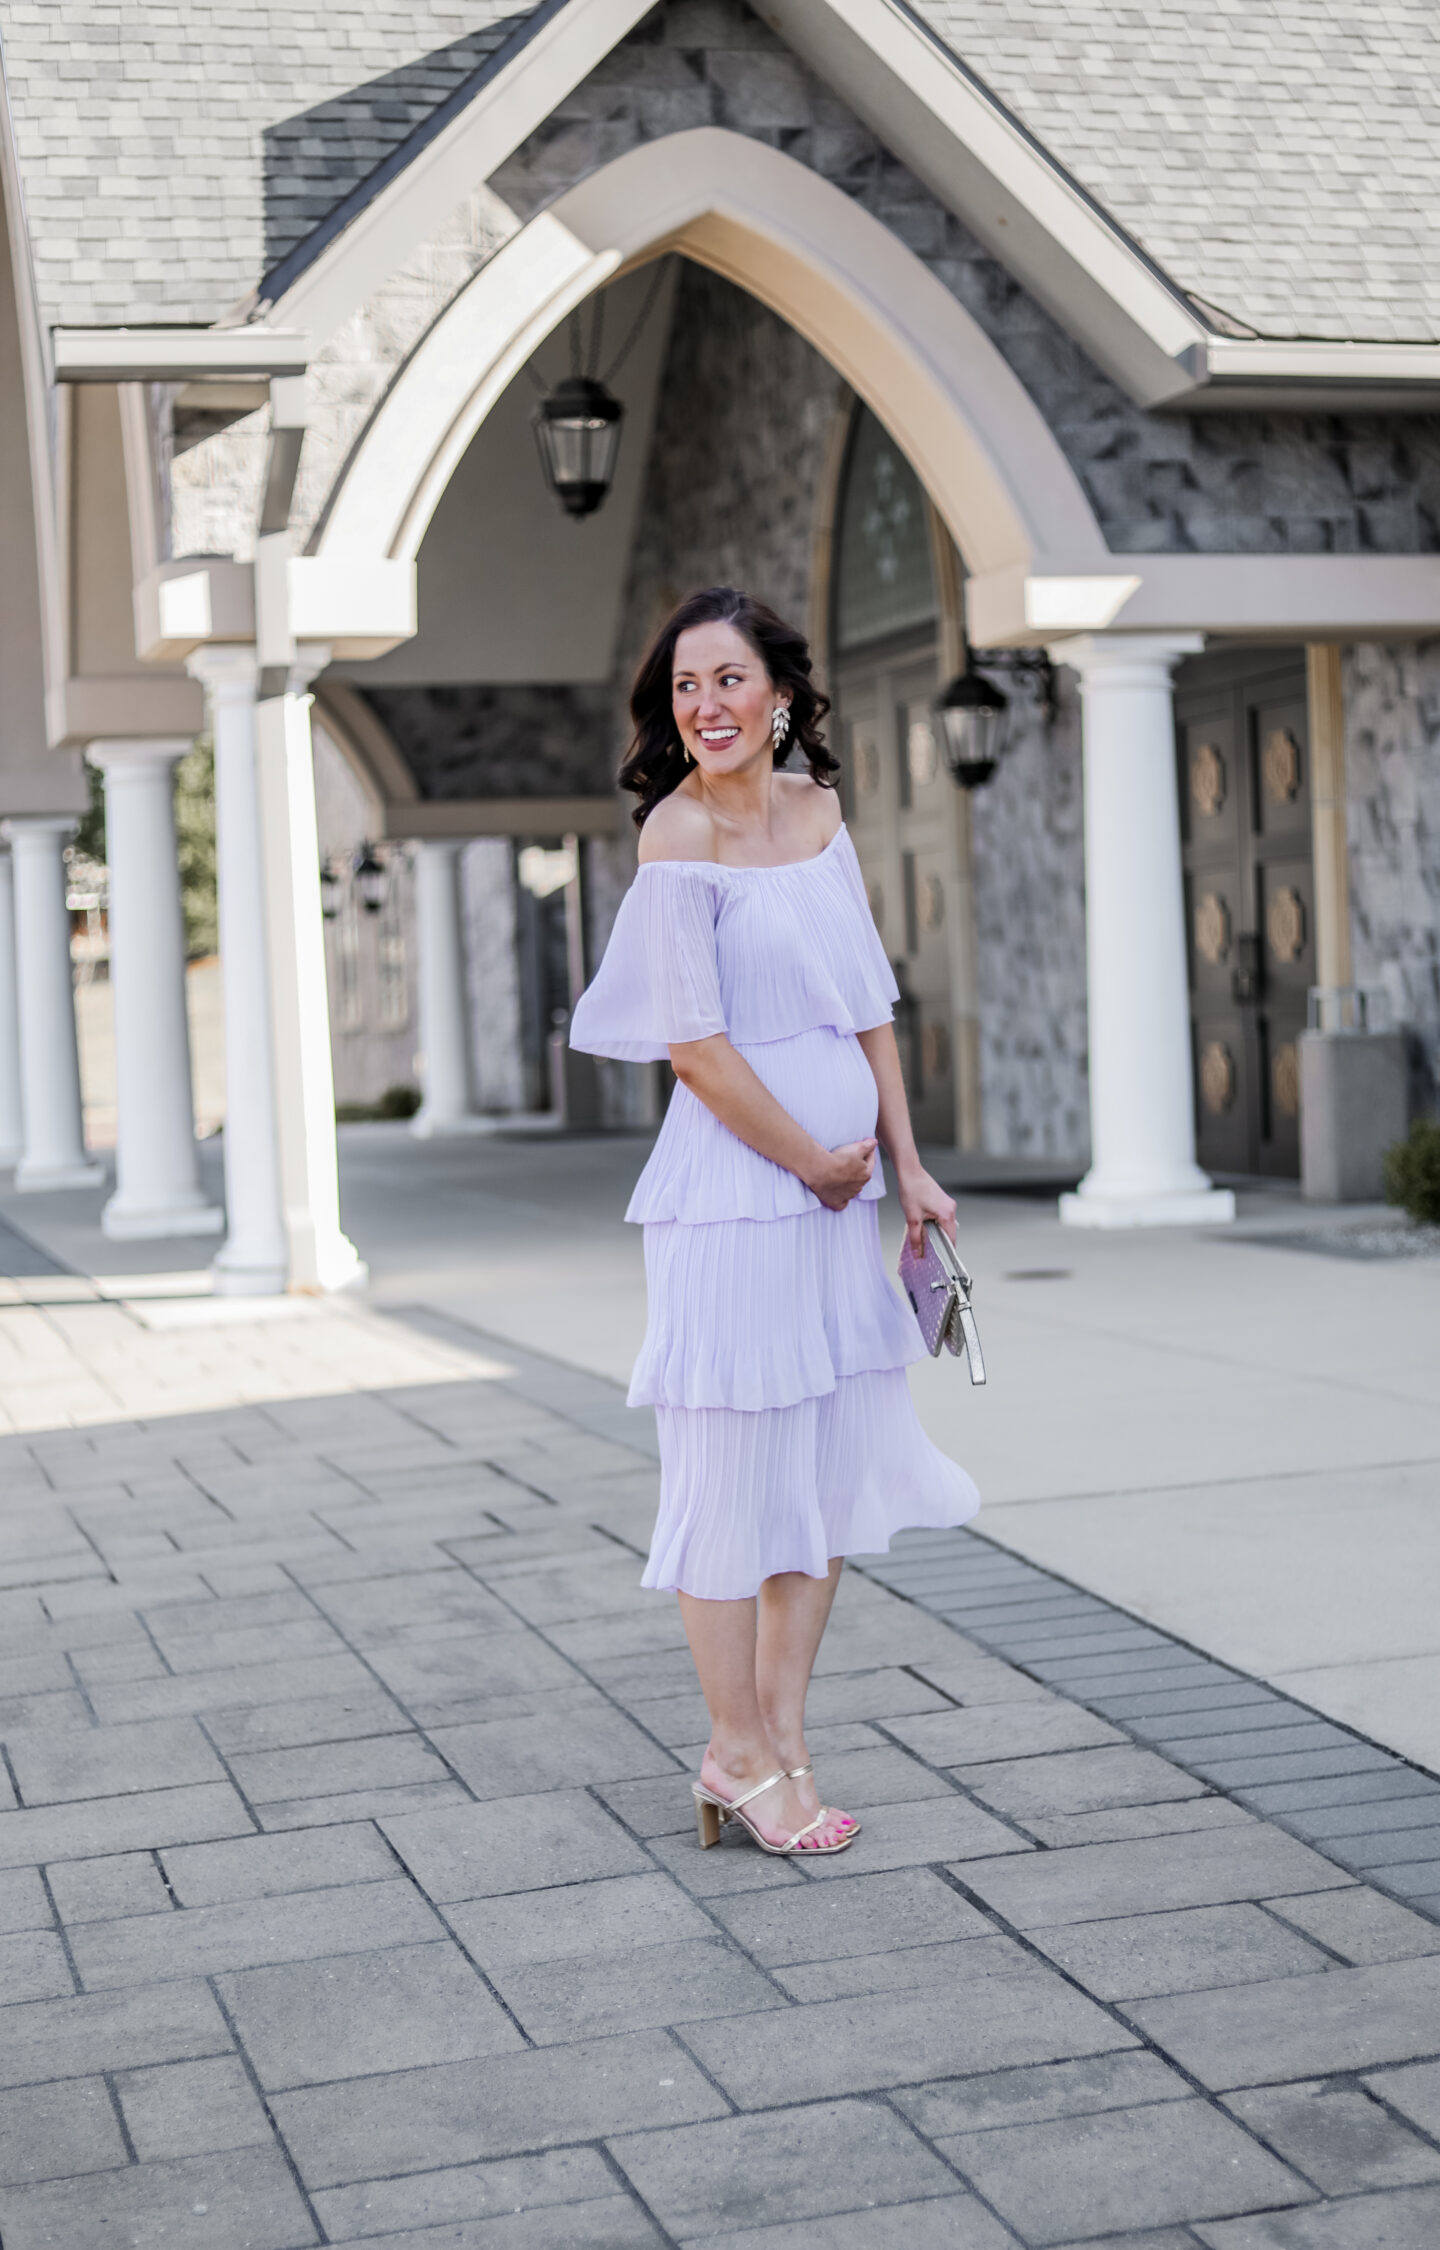 Lavender dress for a wedding guest - SPRING WEDDING GUEST DRESSES under $50 on Coming Up Roses - Amazon wedding guest dress under $50